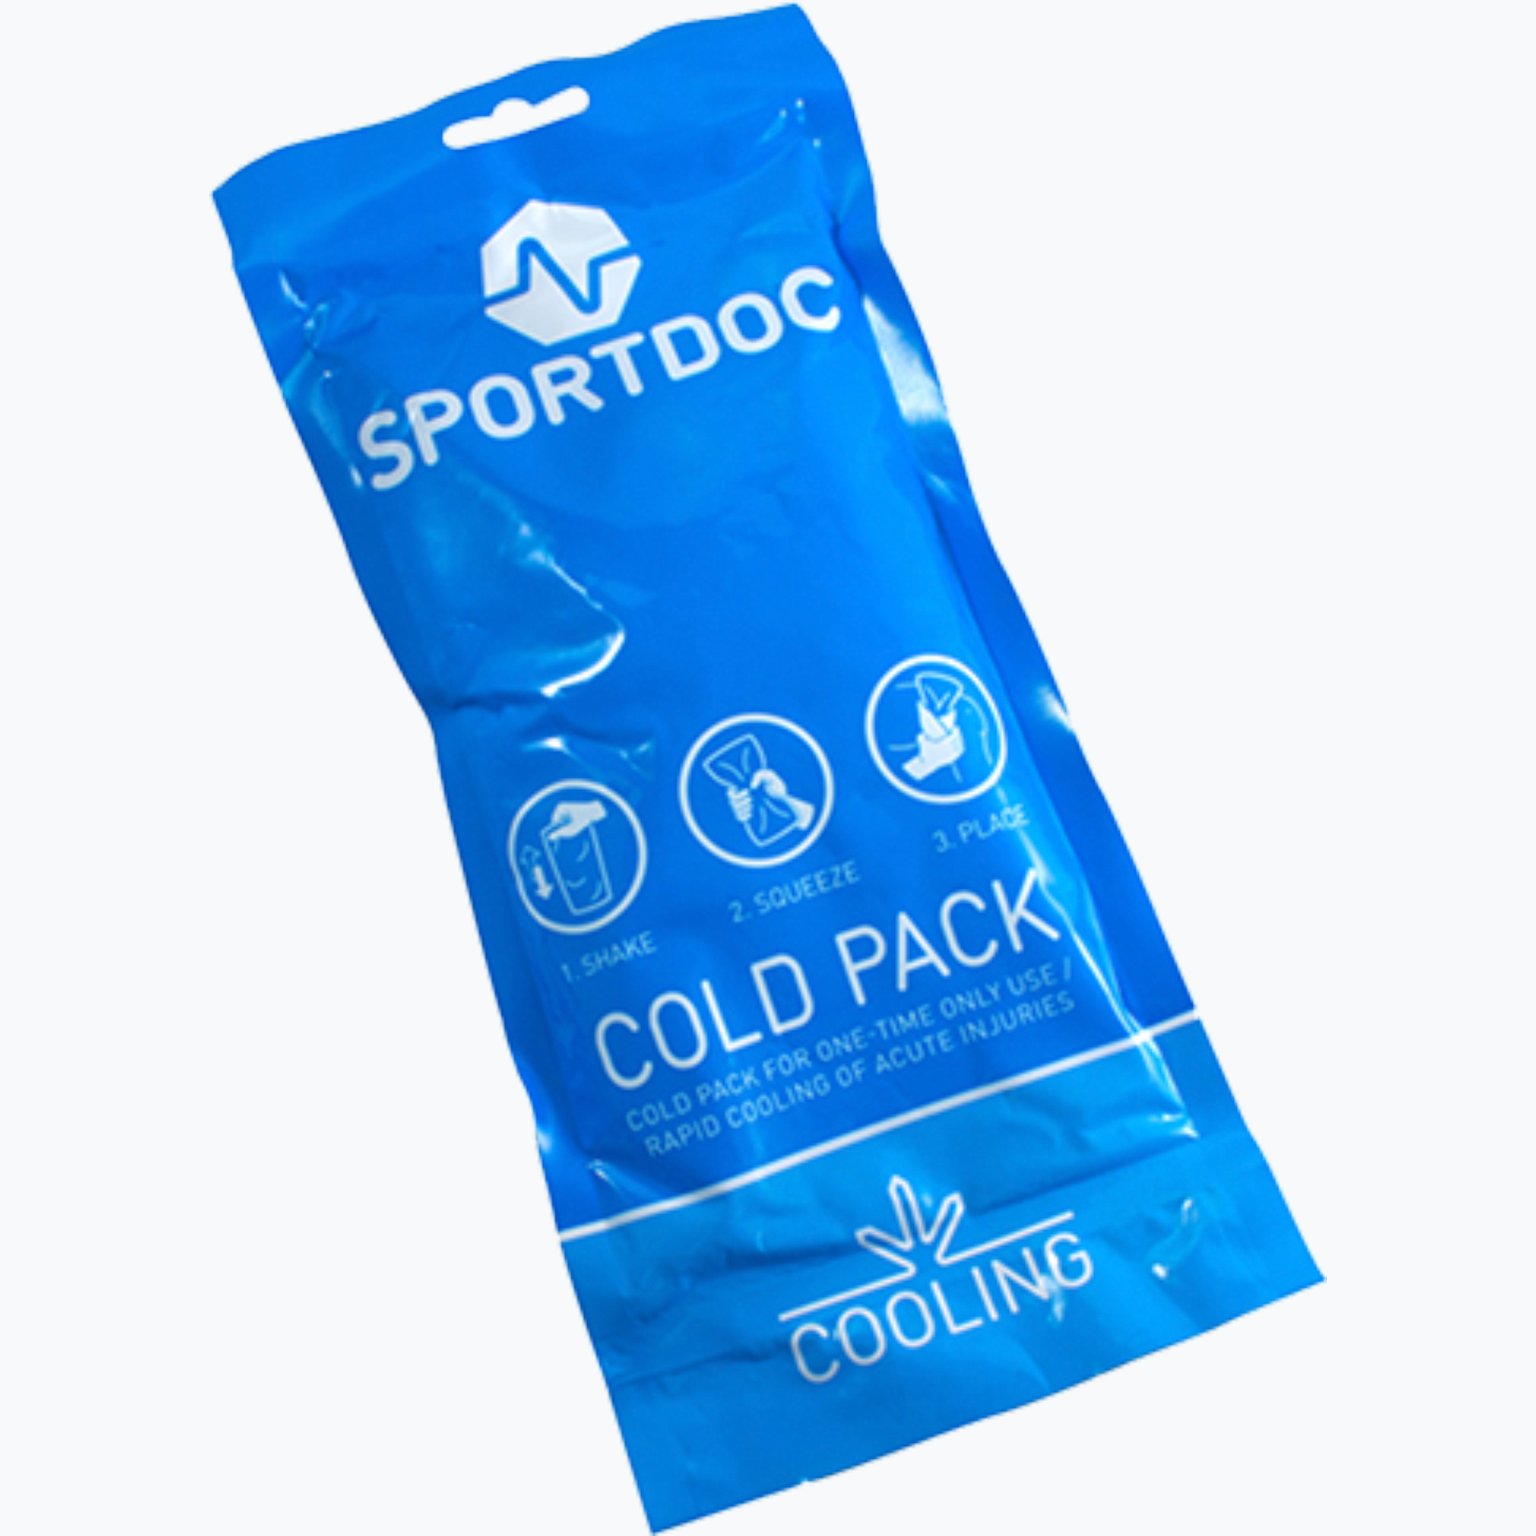 Cold Pack 24-Pack